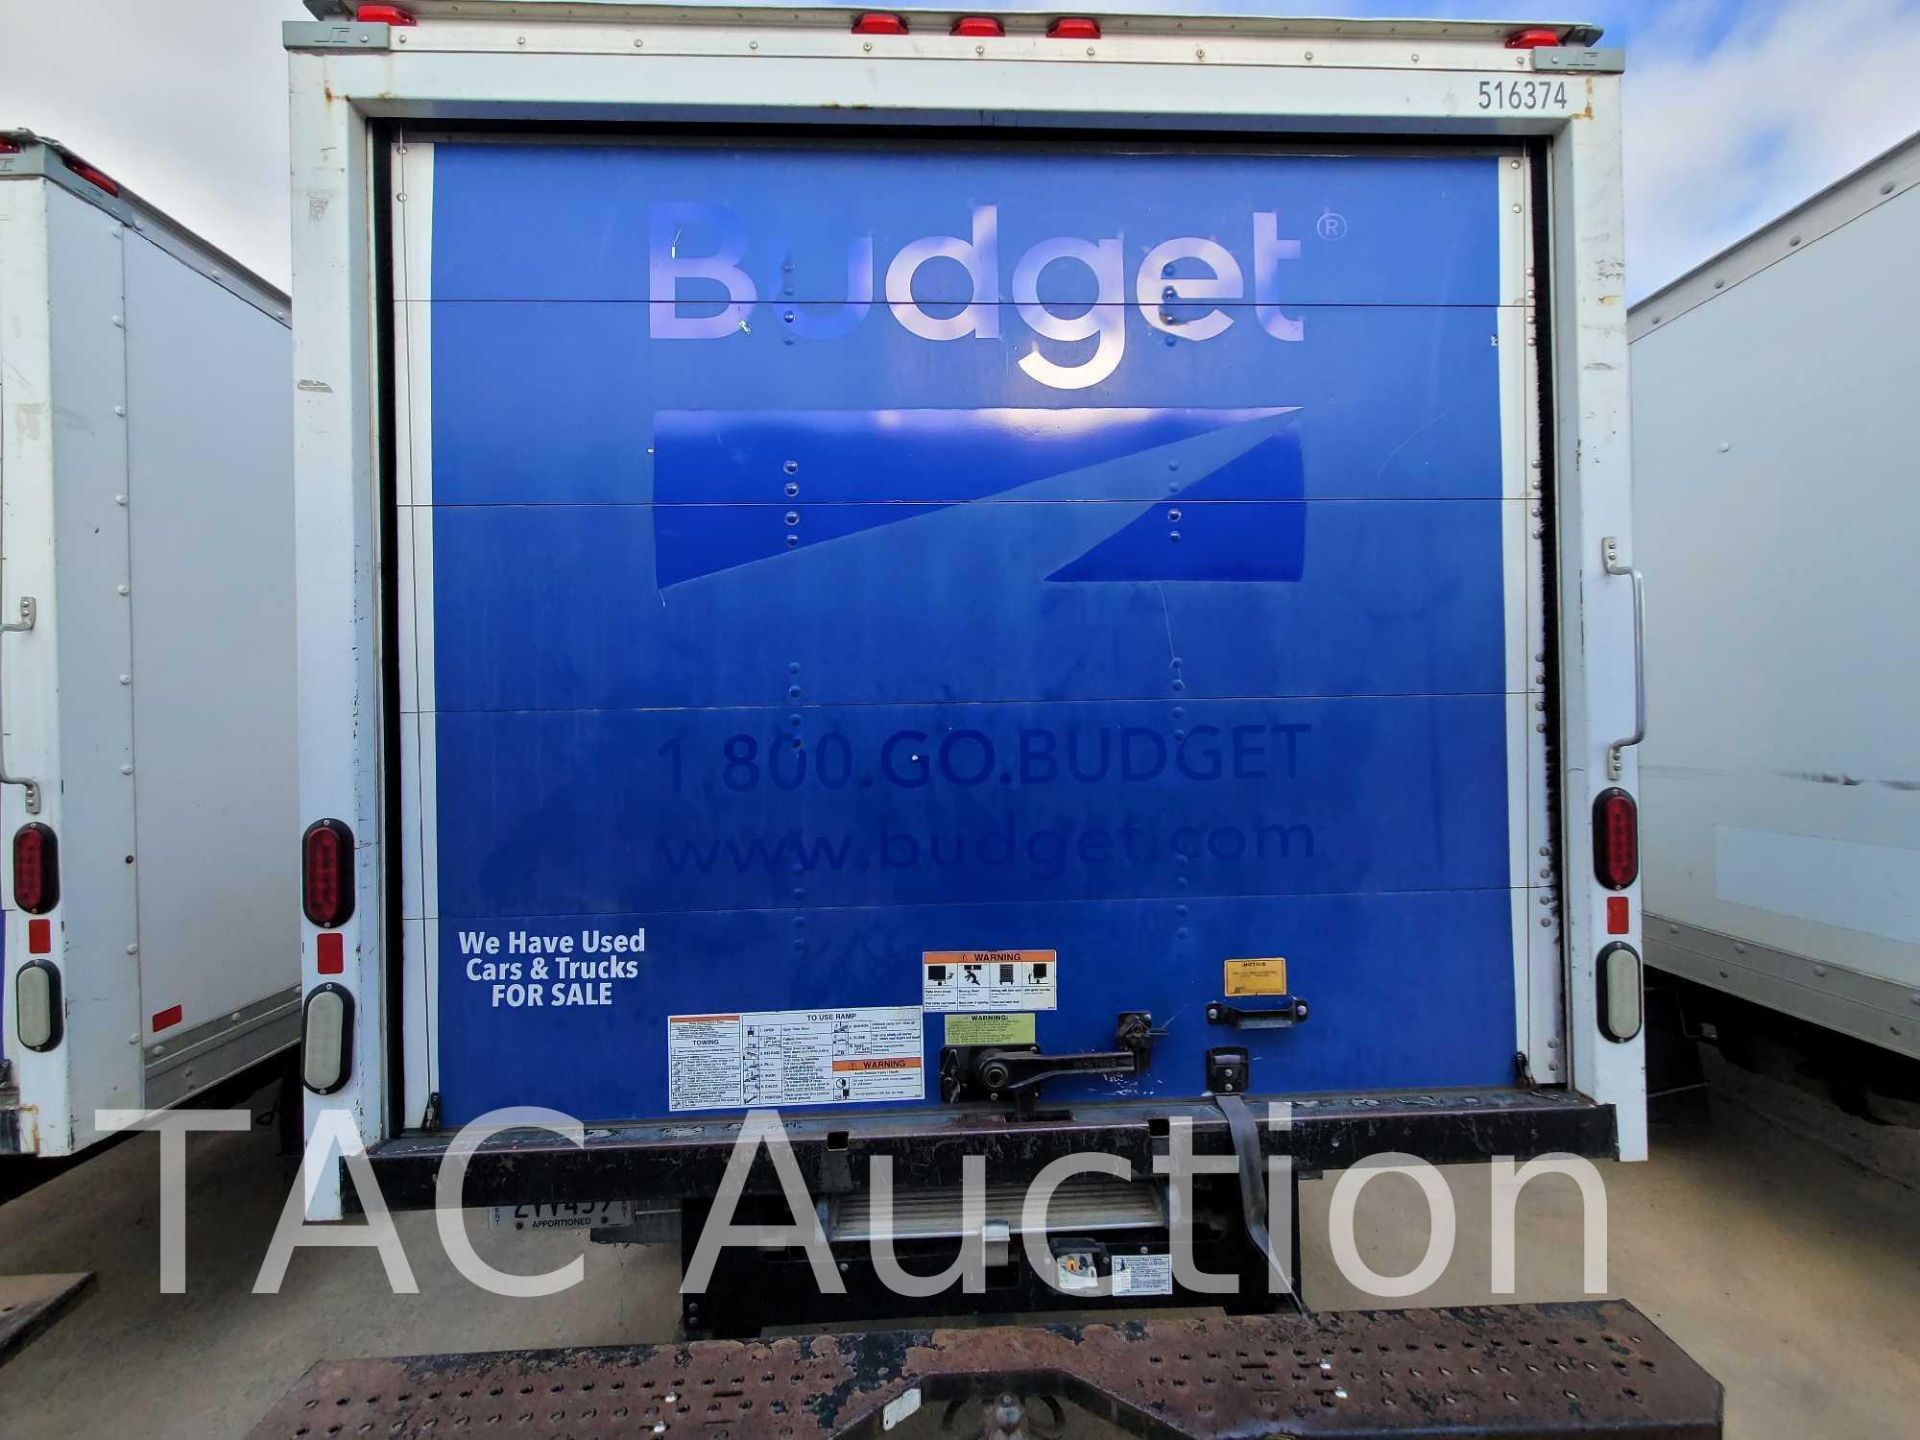 2015 Ford E-350 16ft Box Truck - Image 10 of 96